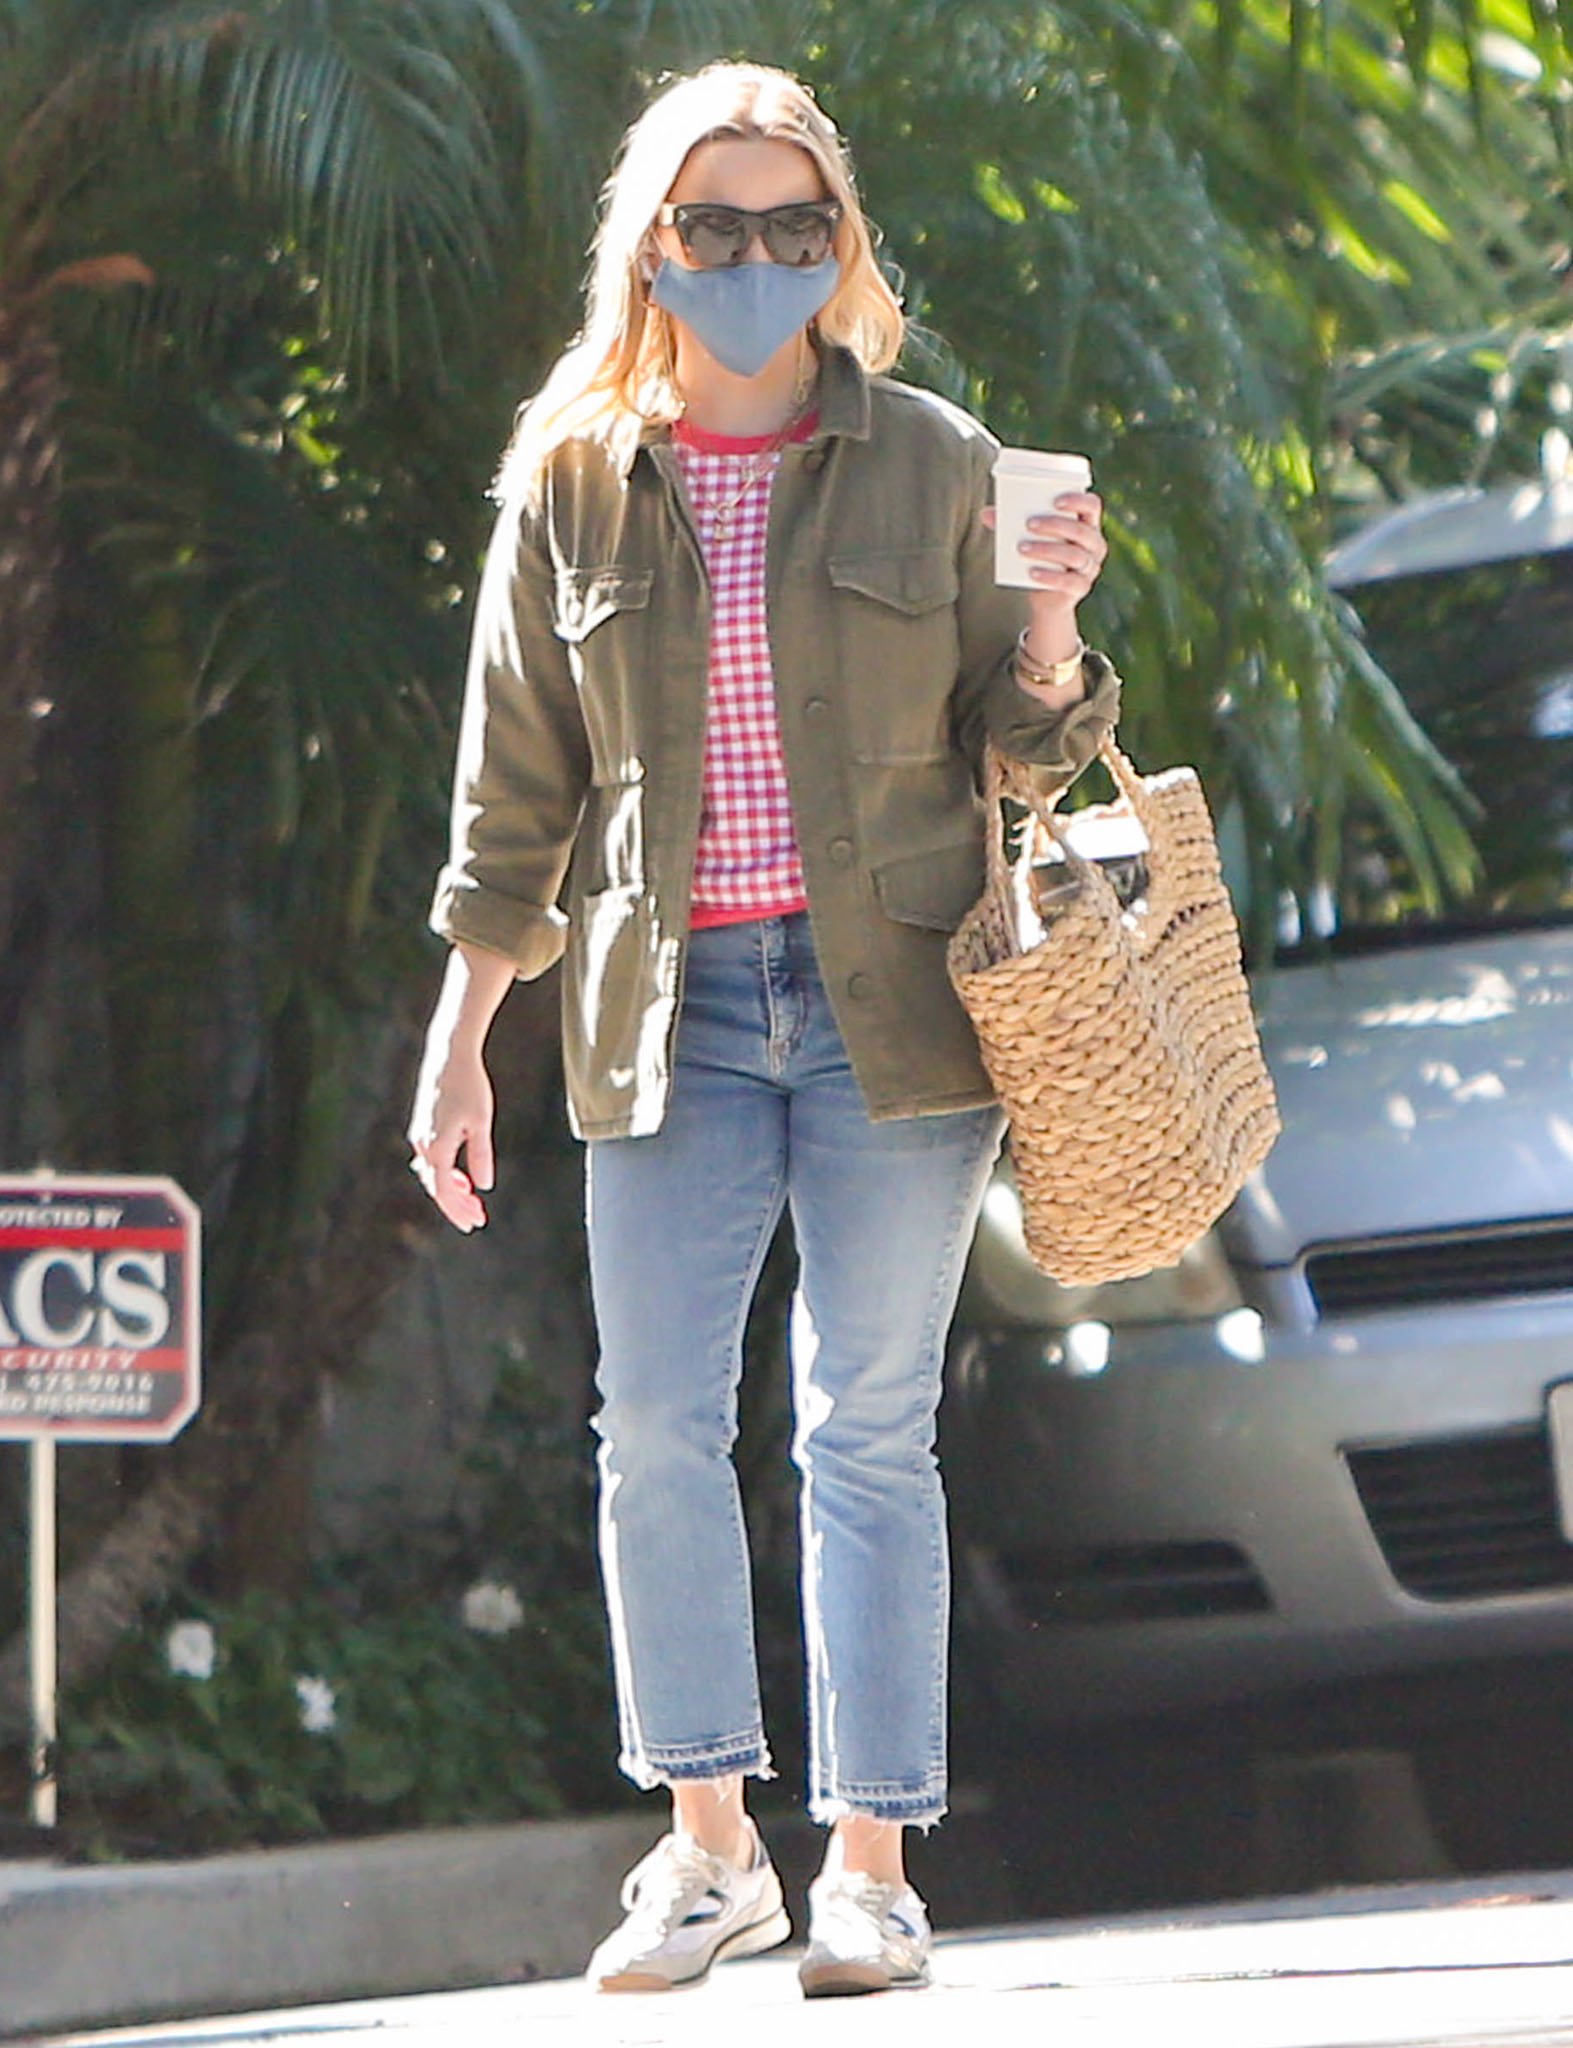 Reese Witherspoon runs errands in Draper James gingham sweater and Topshop jacket in Los Angeles on February 5, 2021